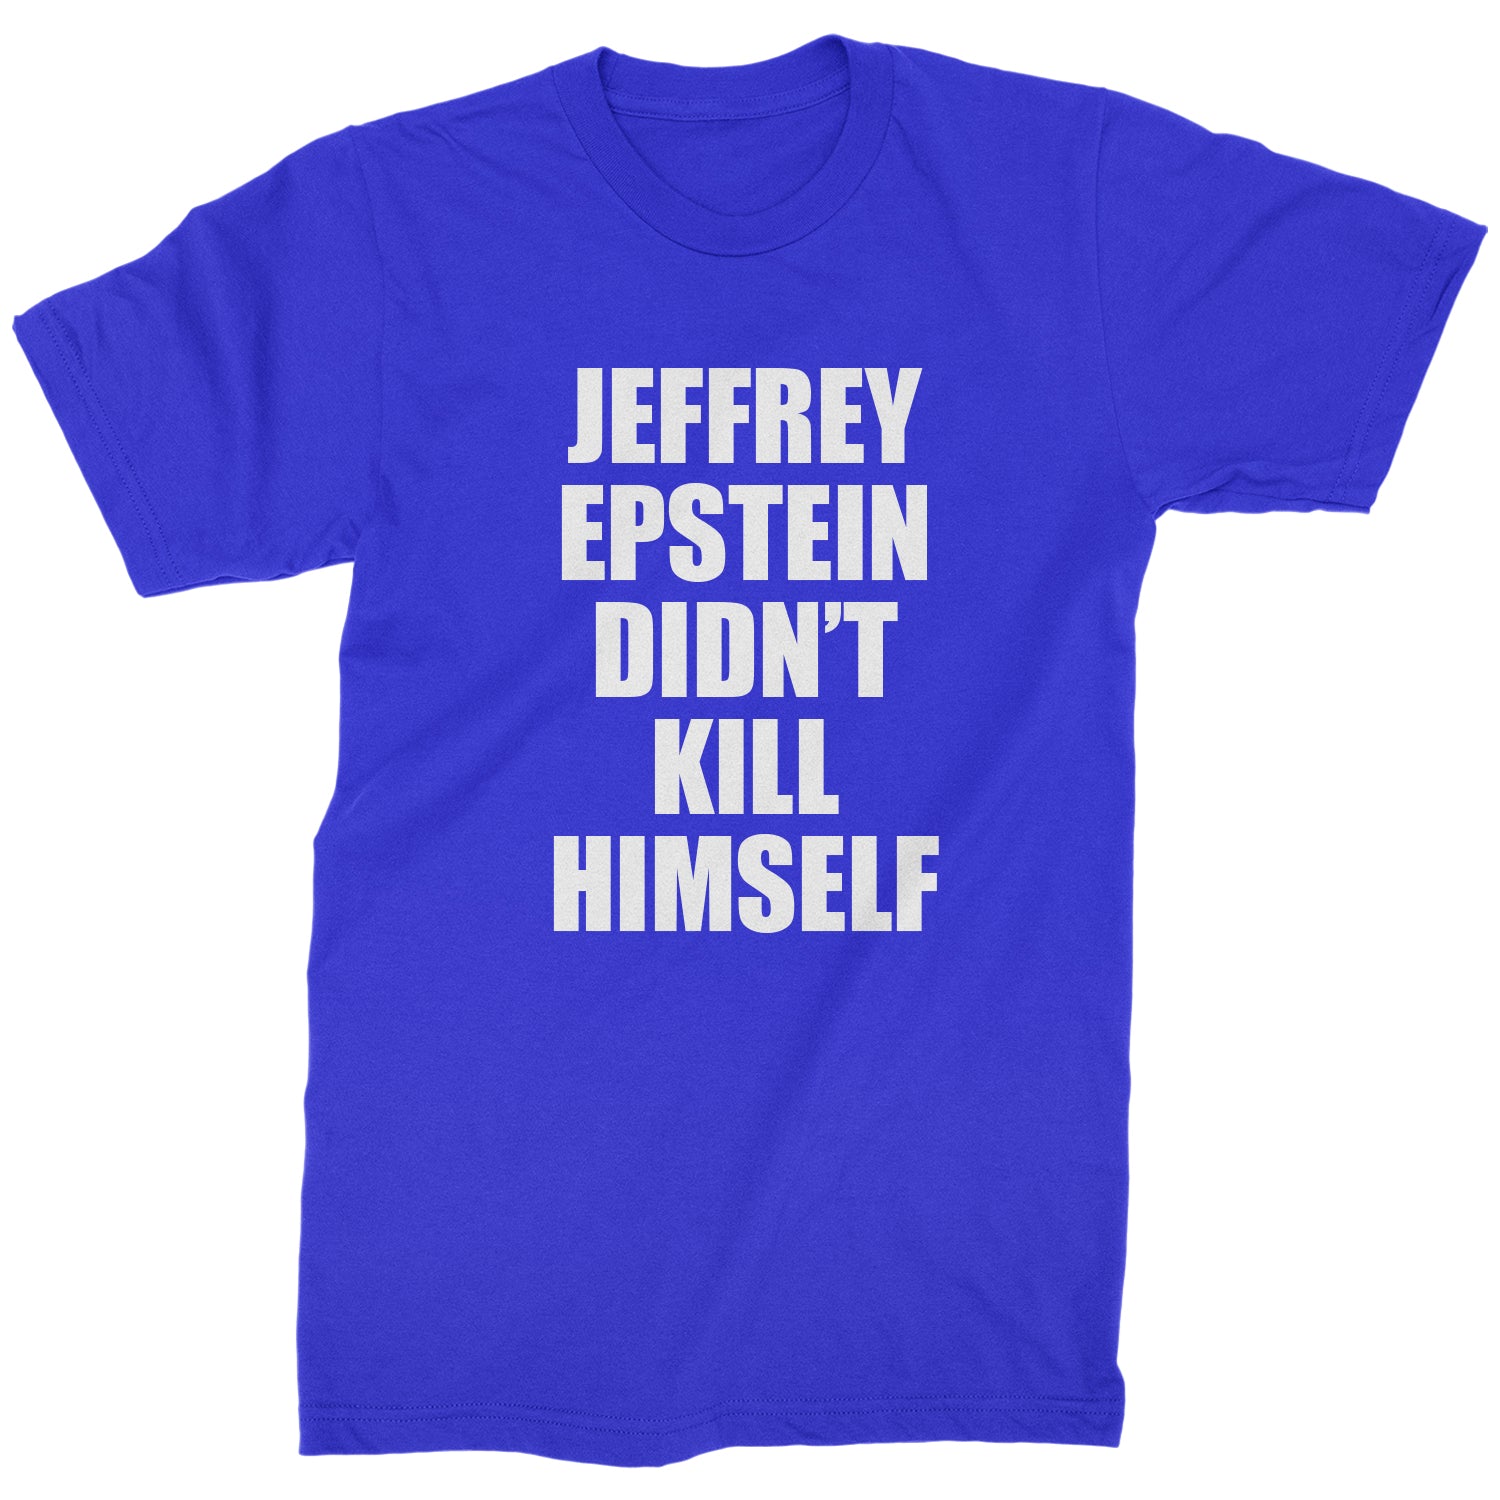 Jeffrey Epstein Didn't Kill Himself Mens T-shirt coverup, homicide, murder, ssadgk, trump by Expression Tees